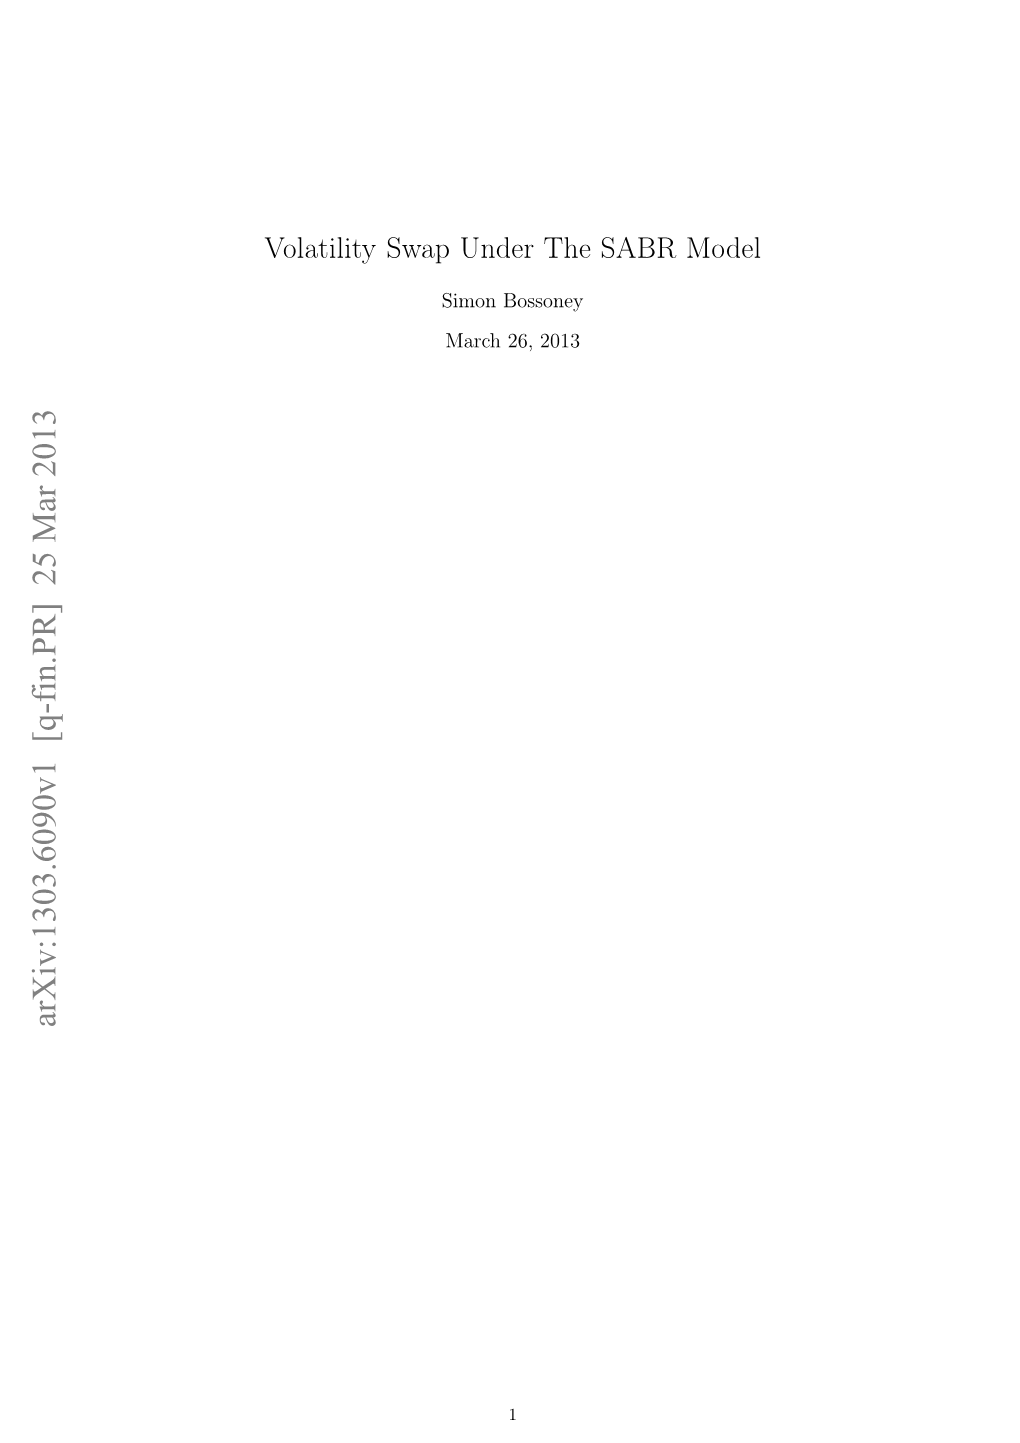 Volatility Swap Under the SABR Model, by Integrating Over X